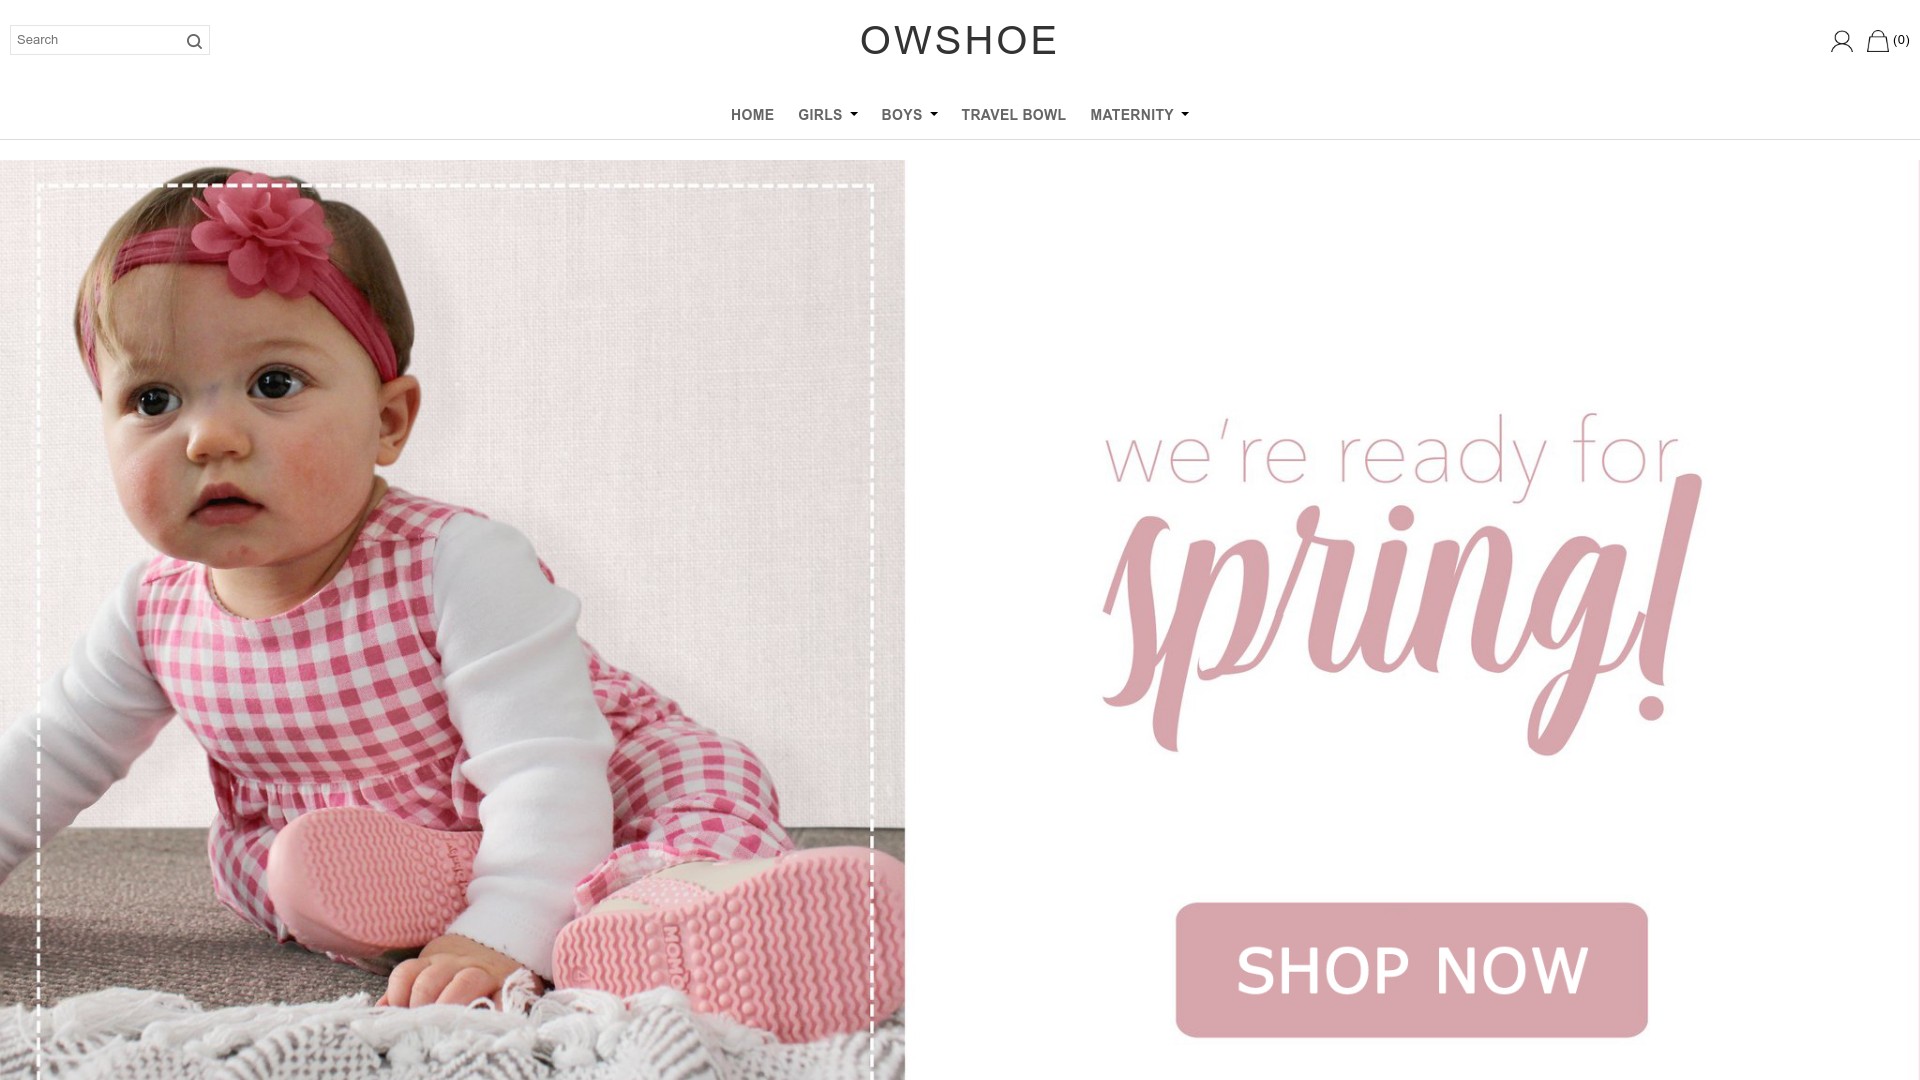 Owshoe Scam  Review of the Online Baby Store